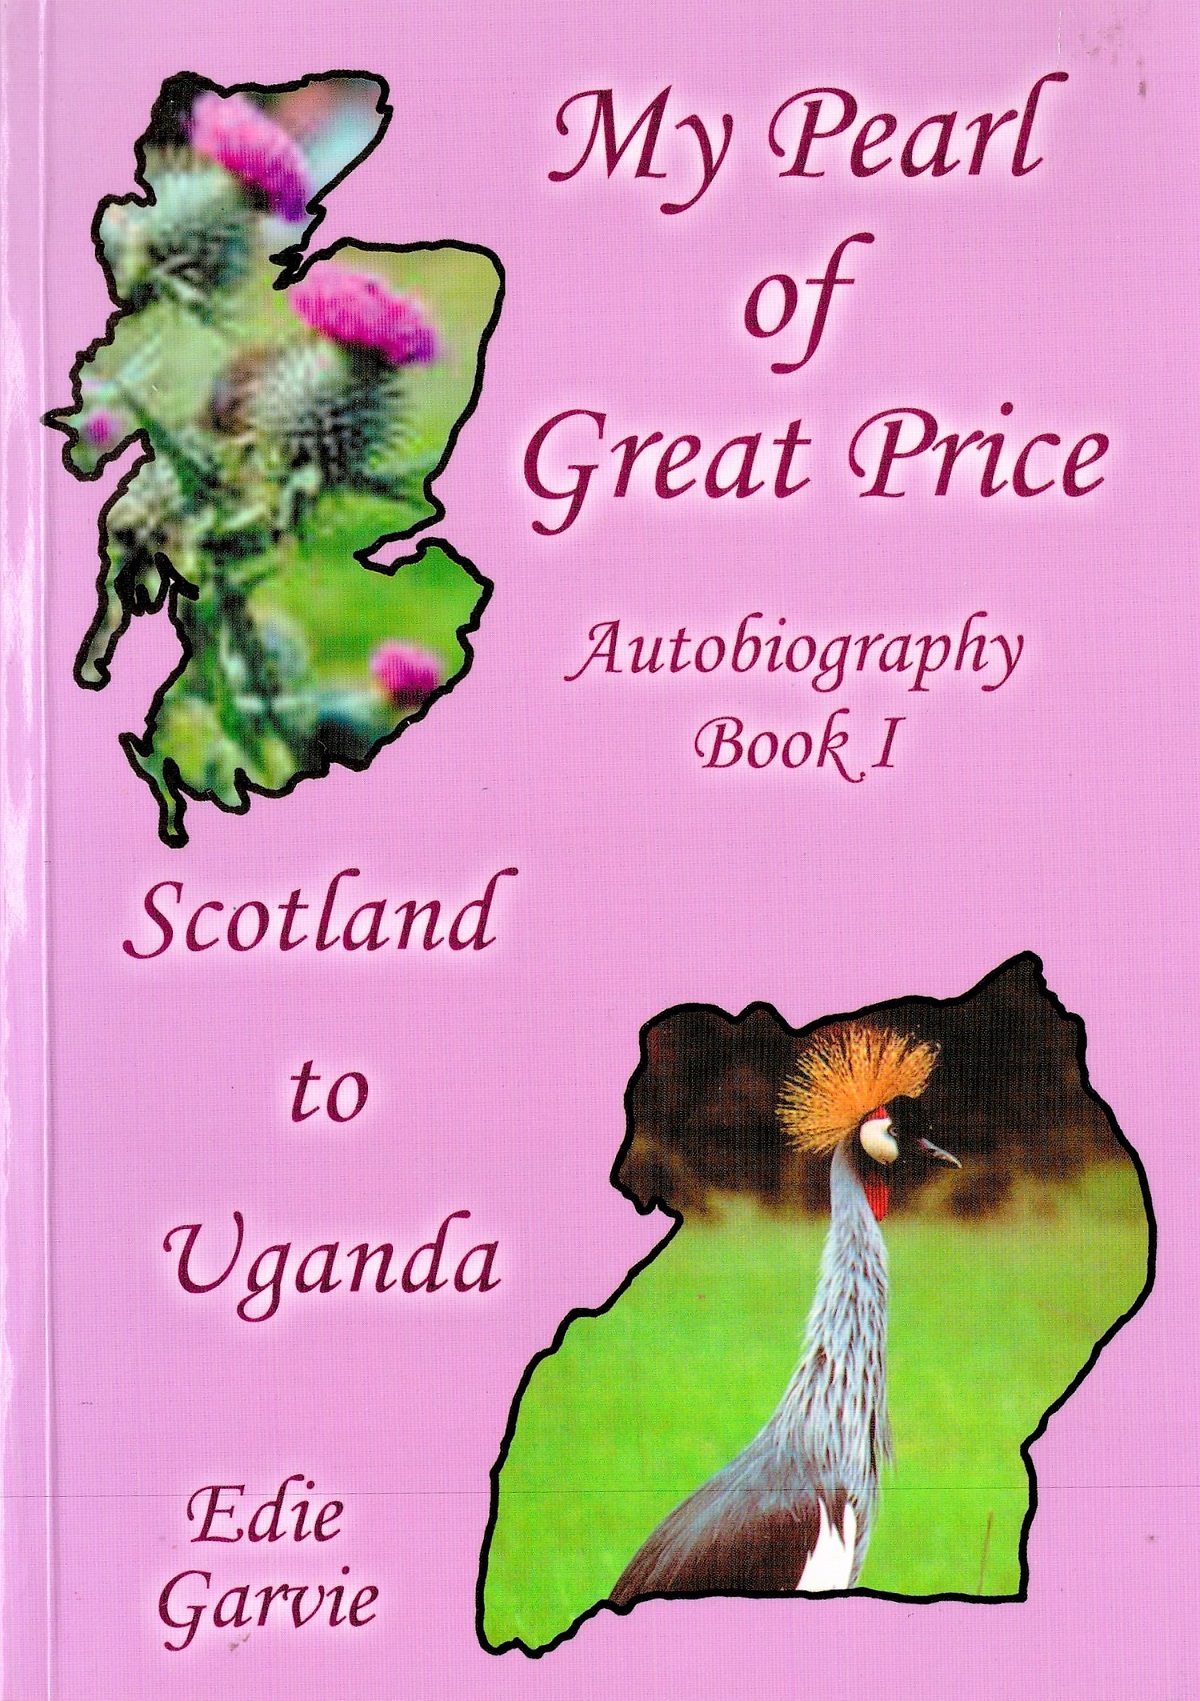 Signed Book Edie Garvie My Pearl of Great Price Autobiography Book 1 Scotland to Uganda 2003 First